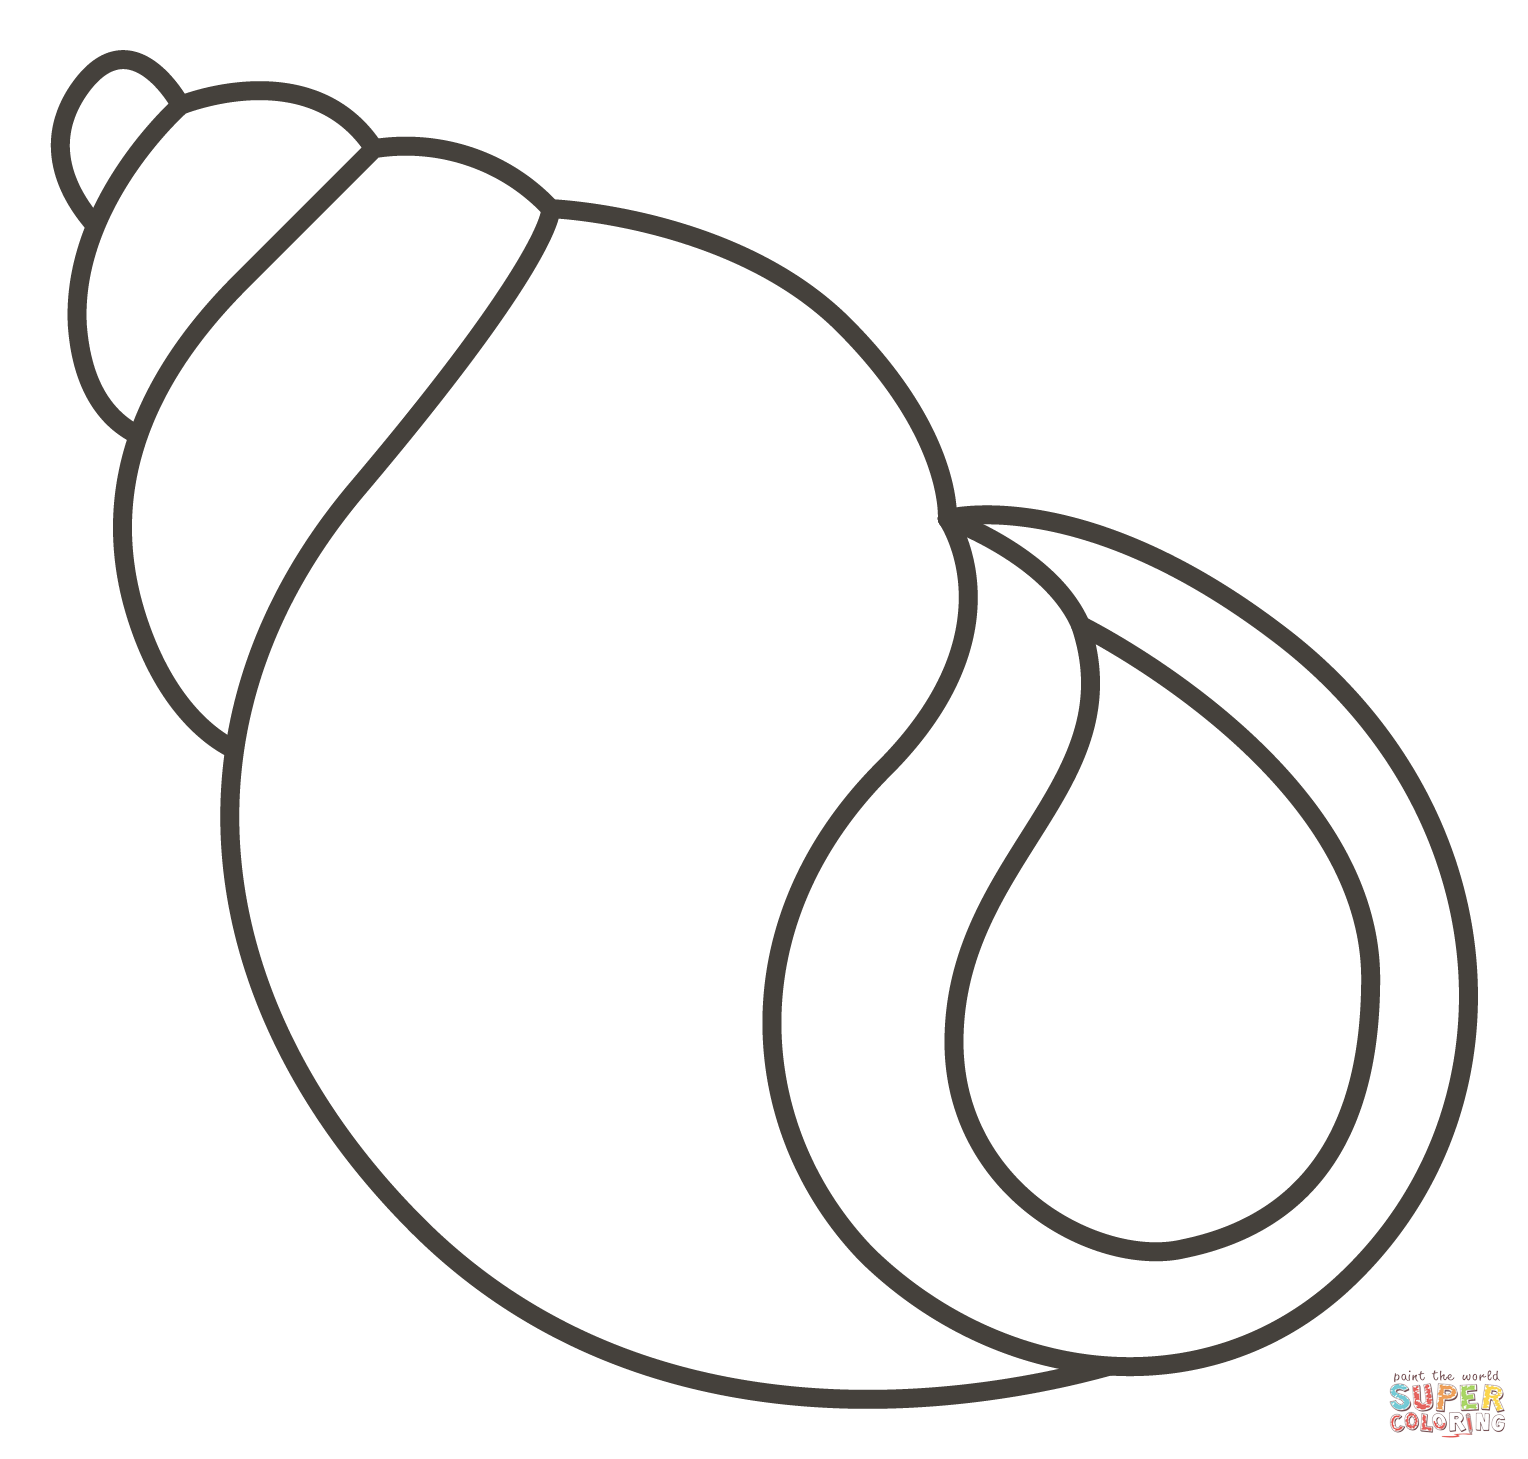 Spiral shell coloring page free printable coloring pages